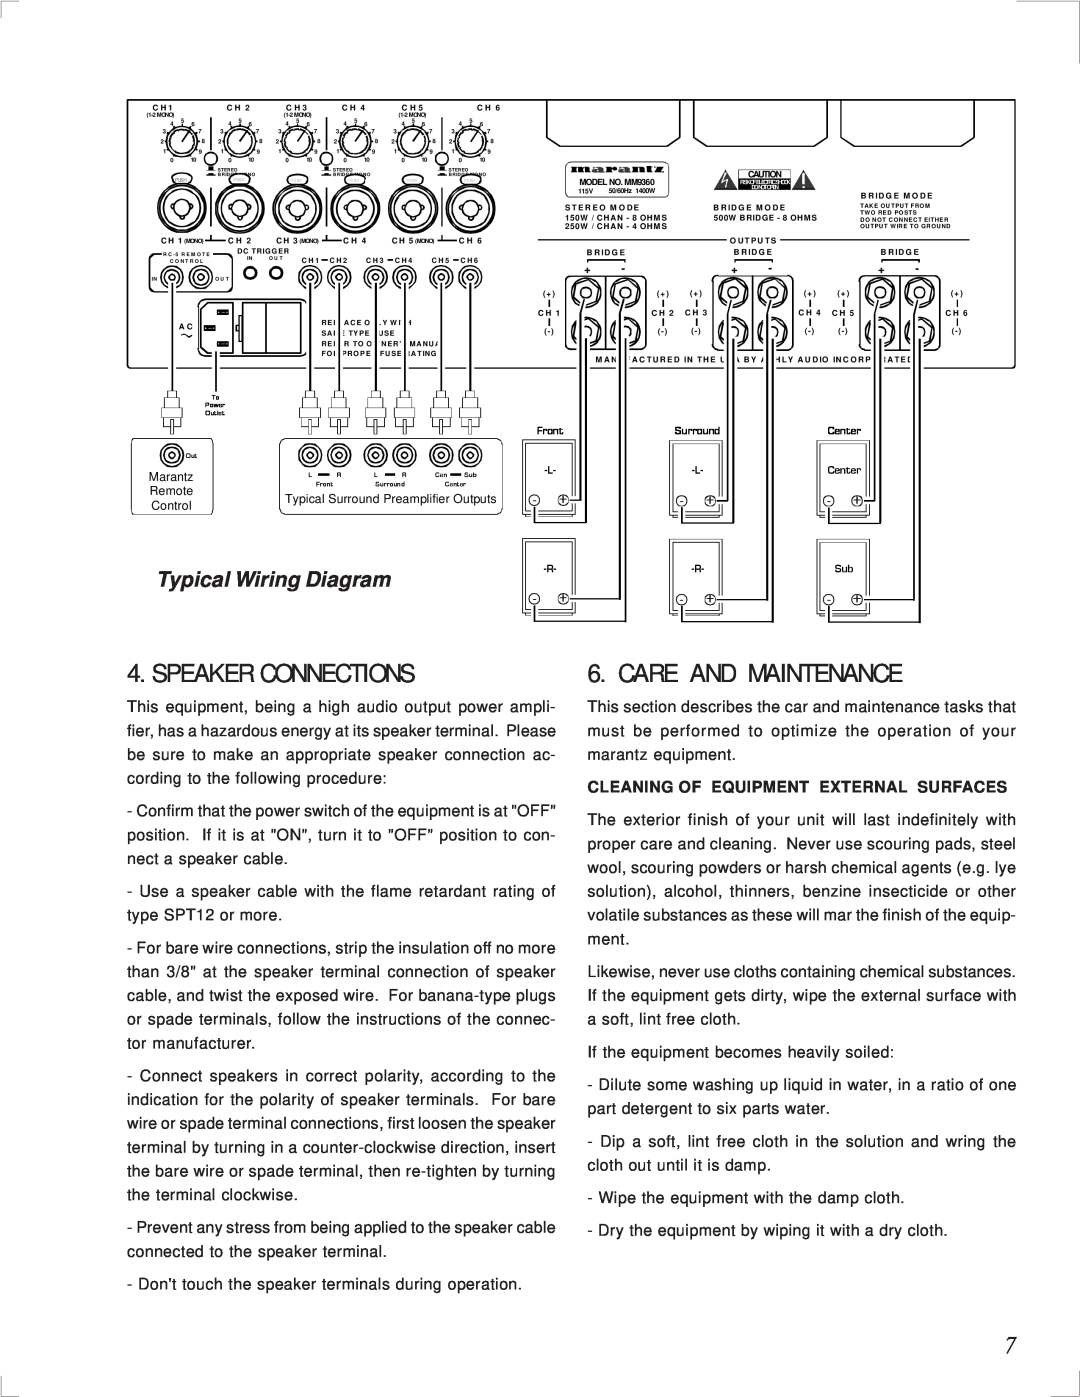 Marantz MM9360 Speaker Connections, Care And Maintenance, Typical Wiring Diagram, Cleaning Of Equipment External Surfaces 